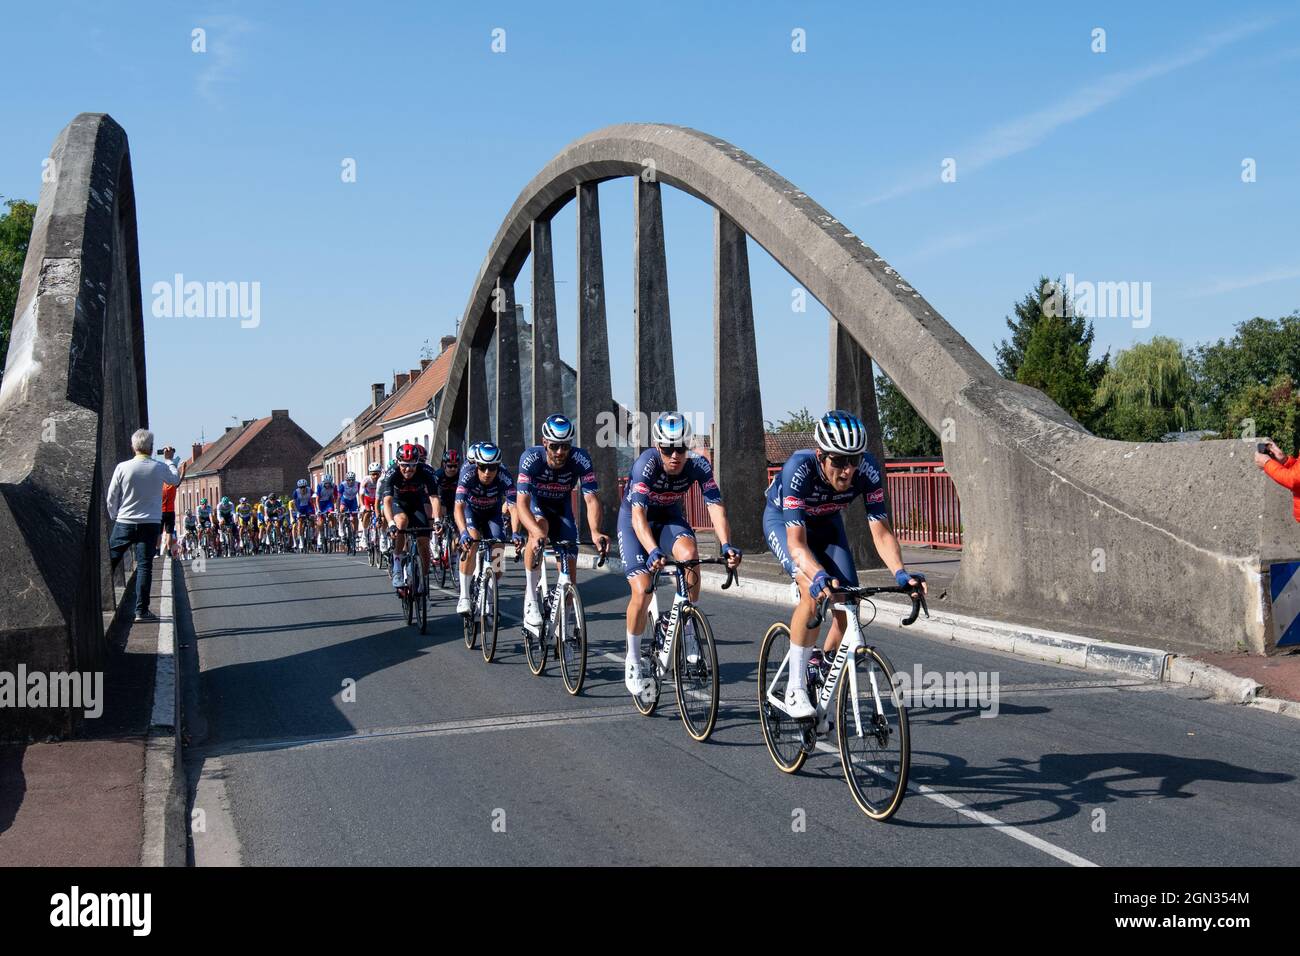 Alpecin hi-res stock photography and images - Alamy